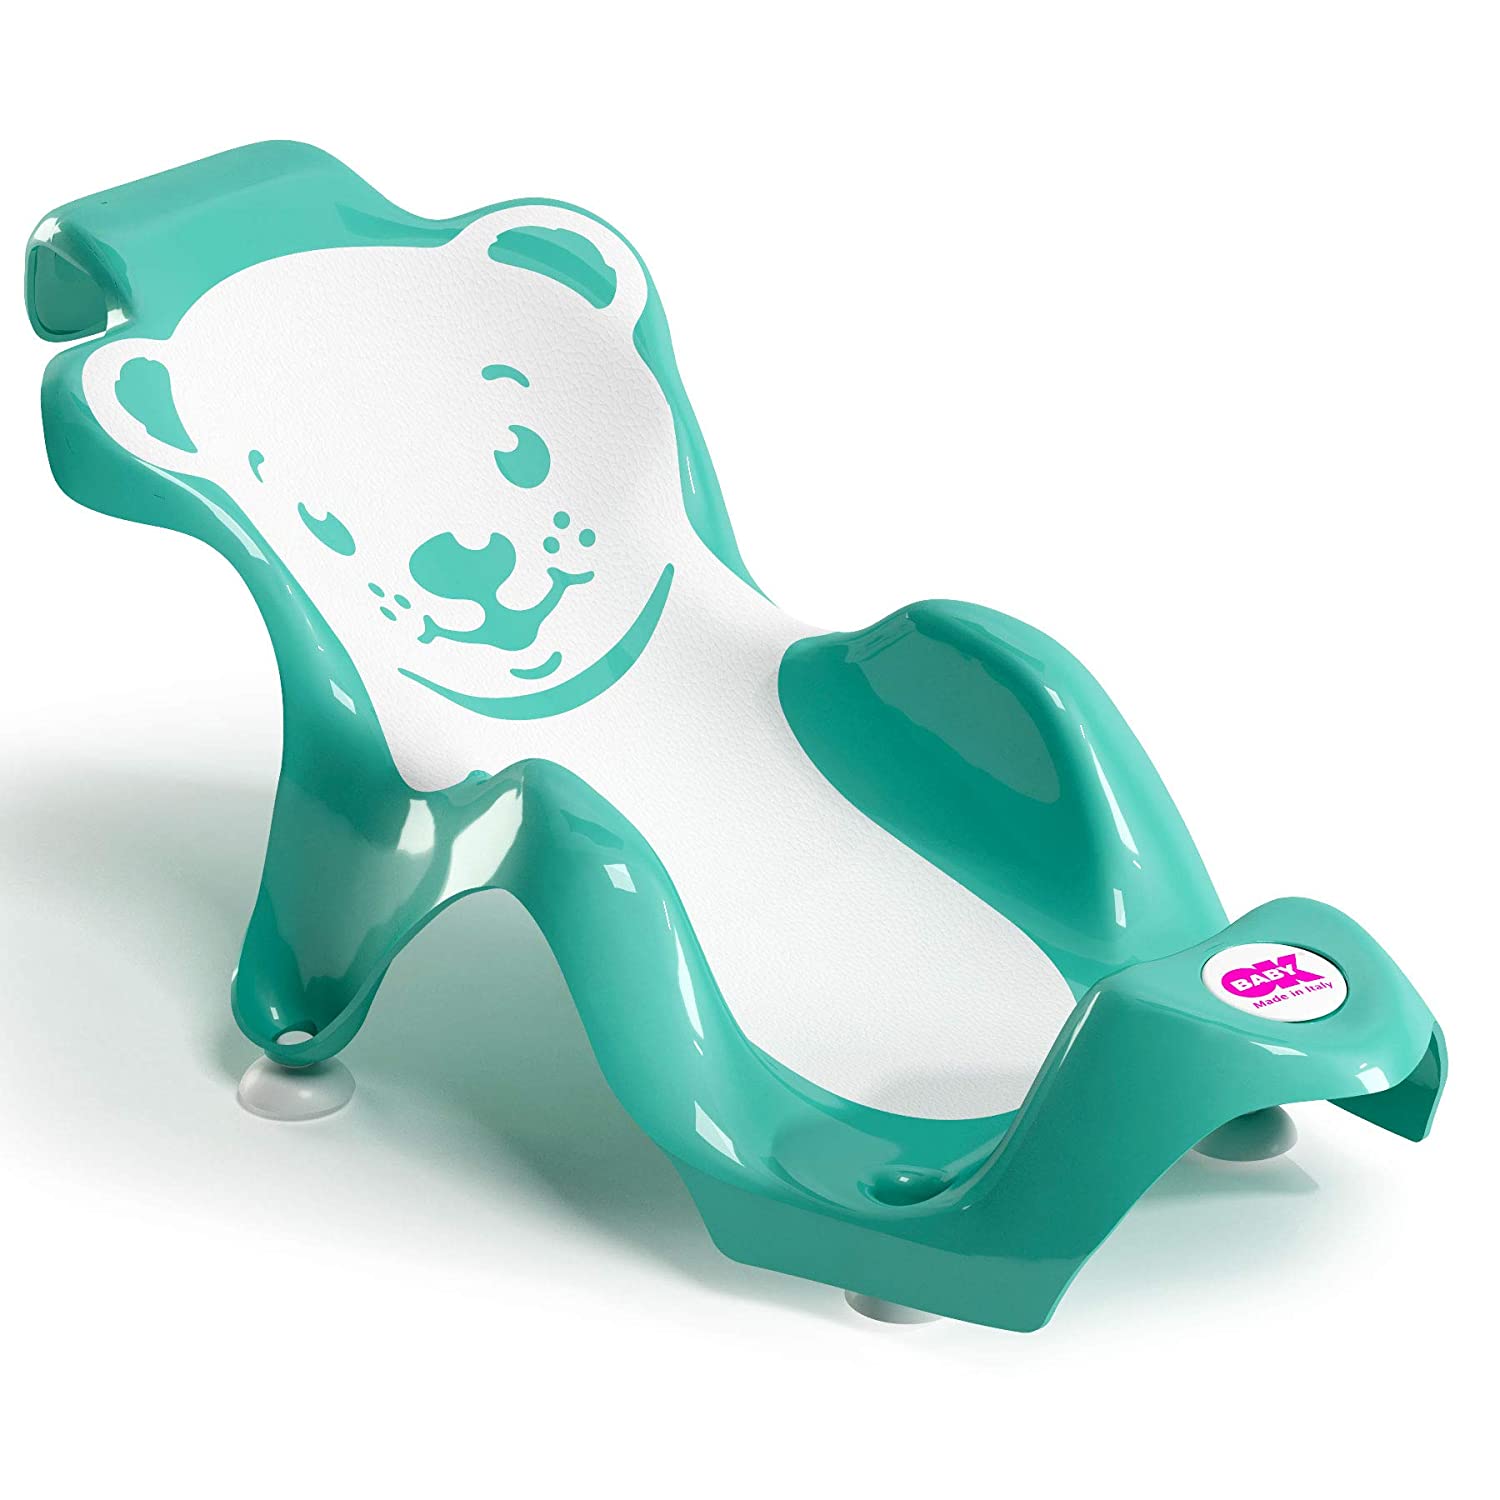 OKBABY Buddy Ergonomic Baby Bath Aid with Non-Slip Rubber Seat for Baby 0 to 8 Months (Max 8kg) - Turquoise